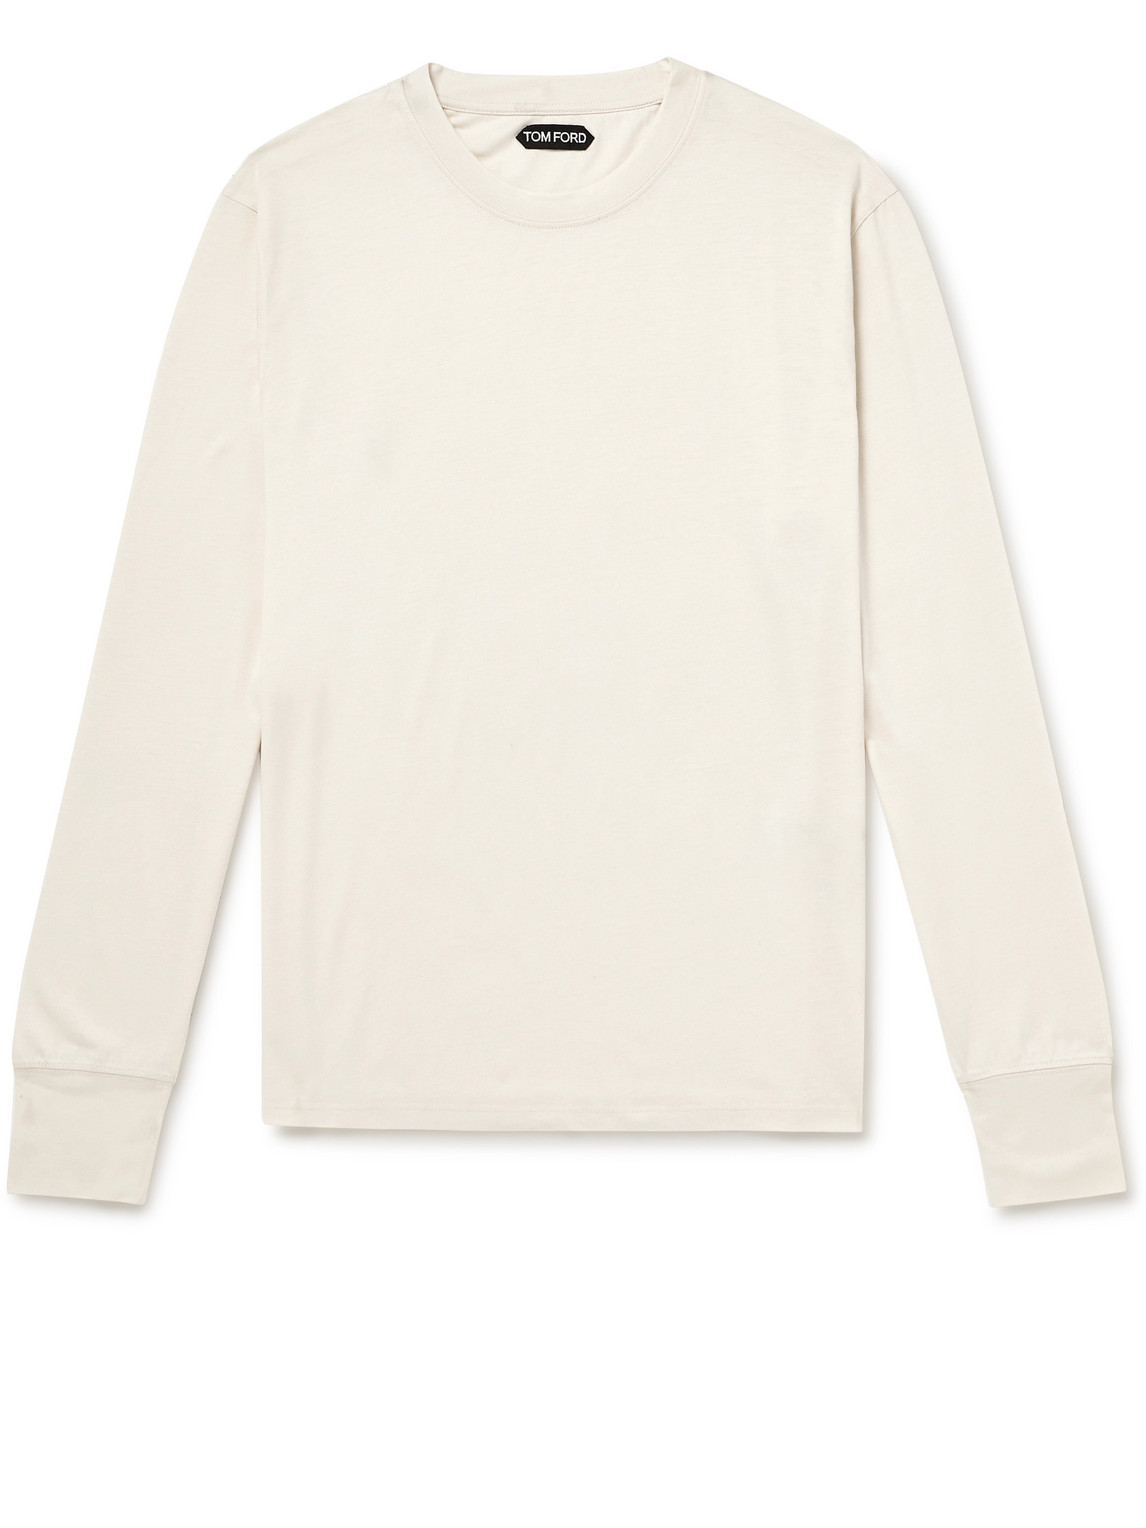 TOM FORD - Logo-Embroidered Lyocell and Cotton-Blend Jersey T-Shirt - Men - White - IT 56 von TOM FORD